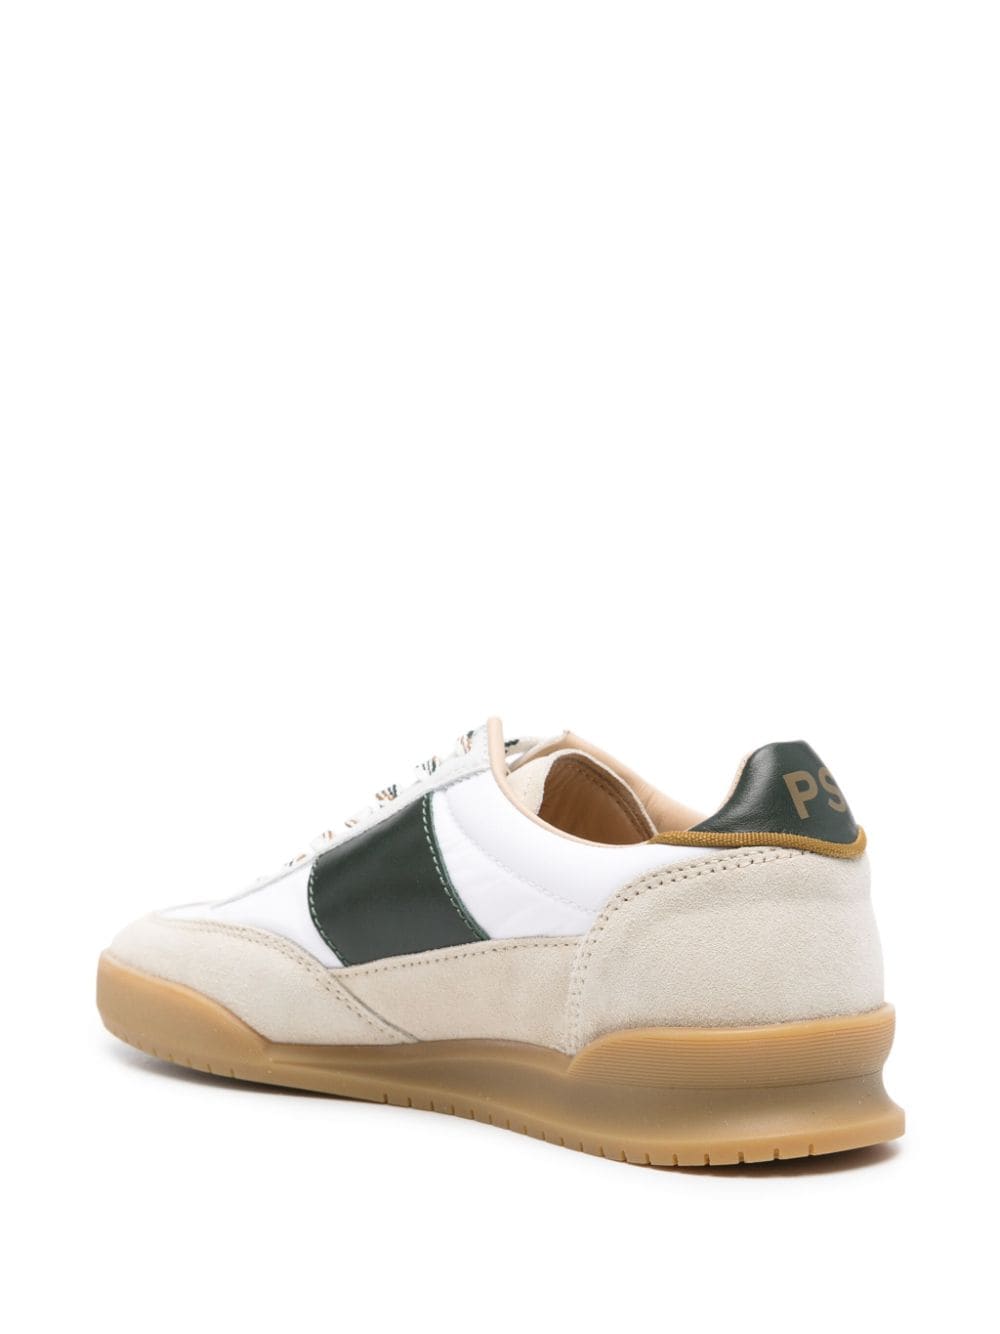 Paul Smith Sneakers White